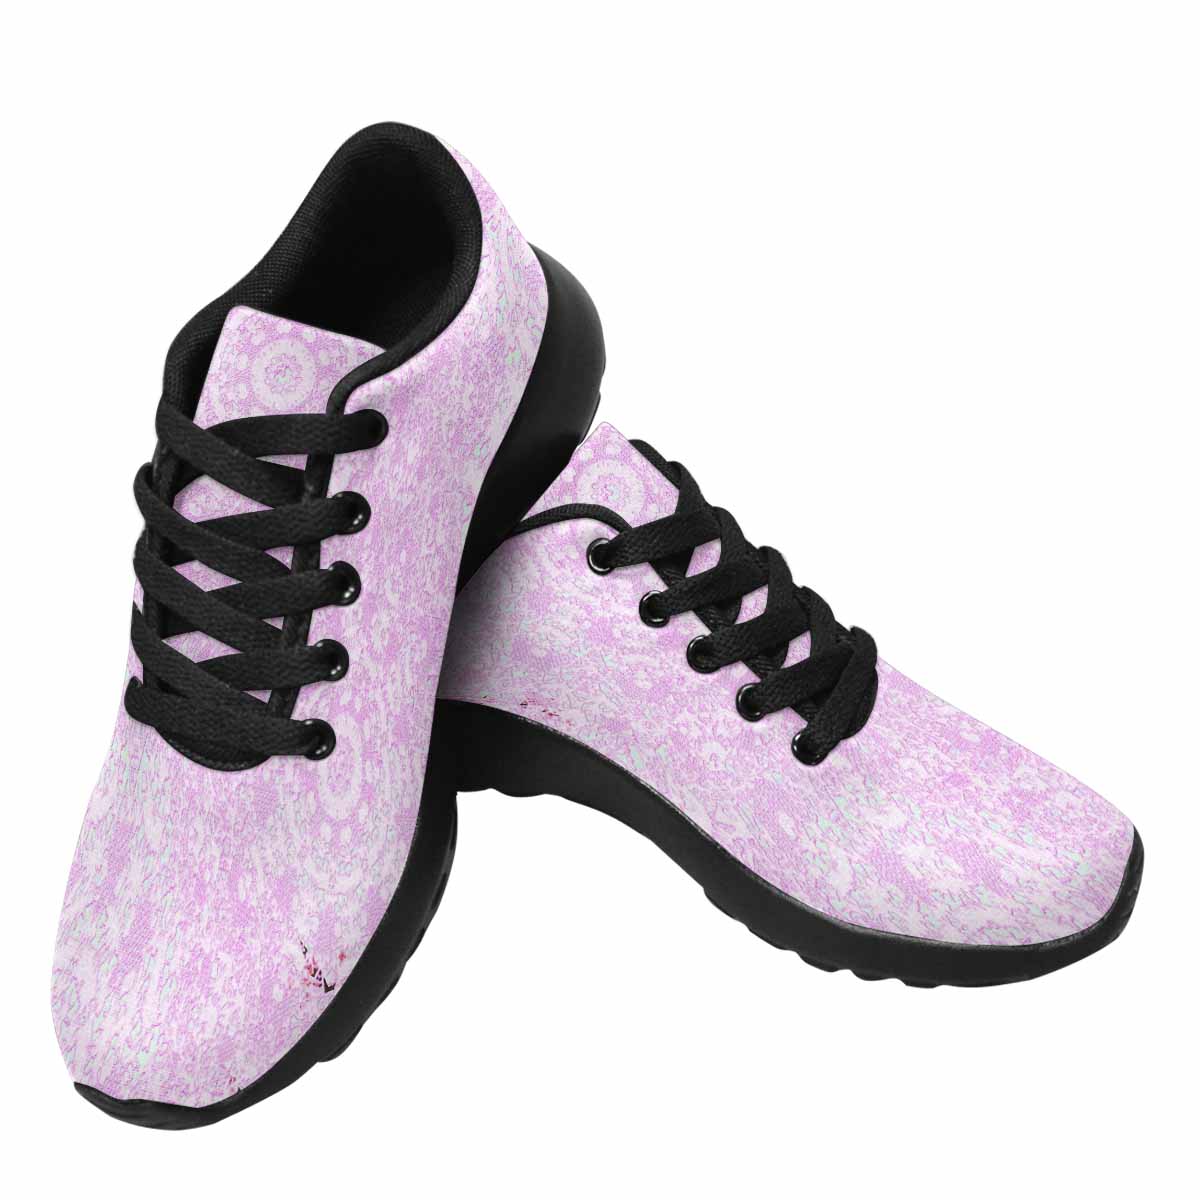 Victorian lace print, womens cute casual or running sneakers, design 09